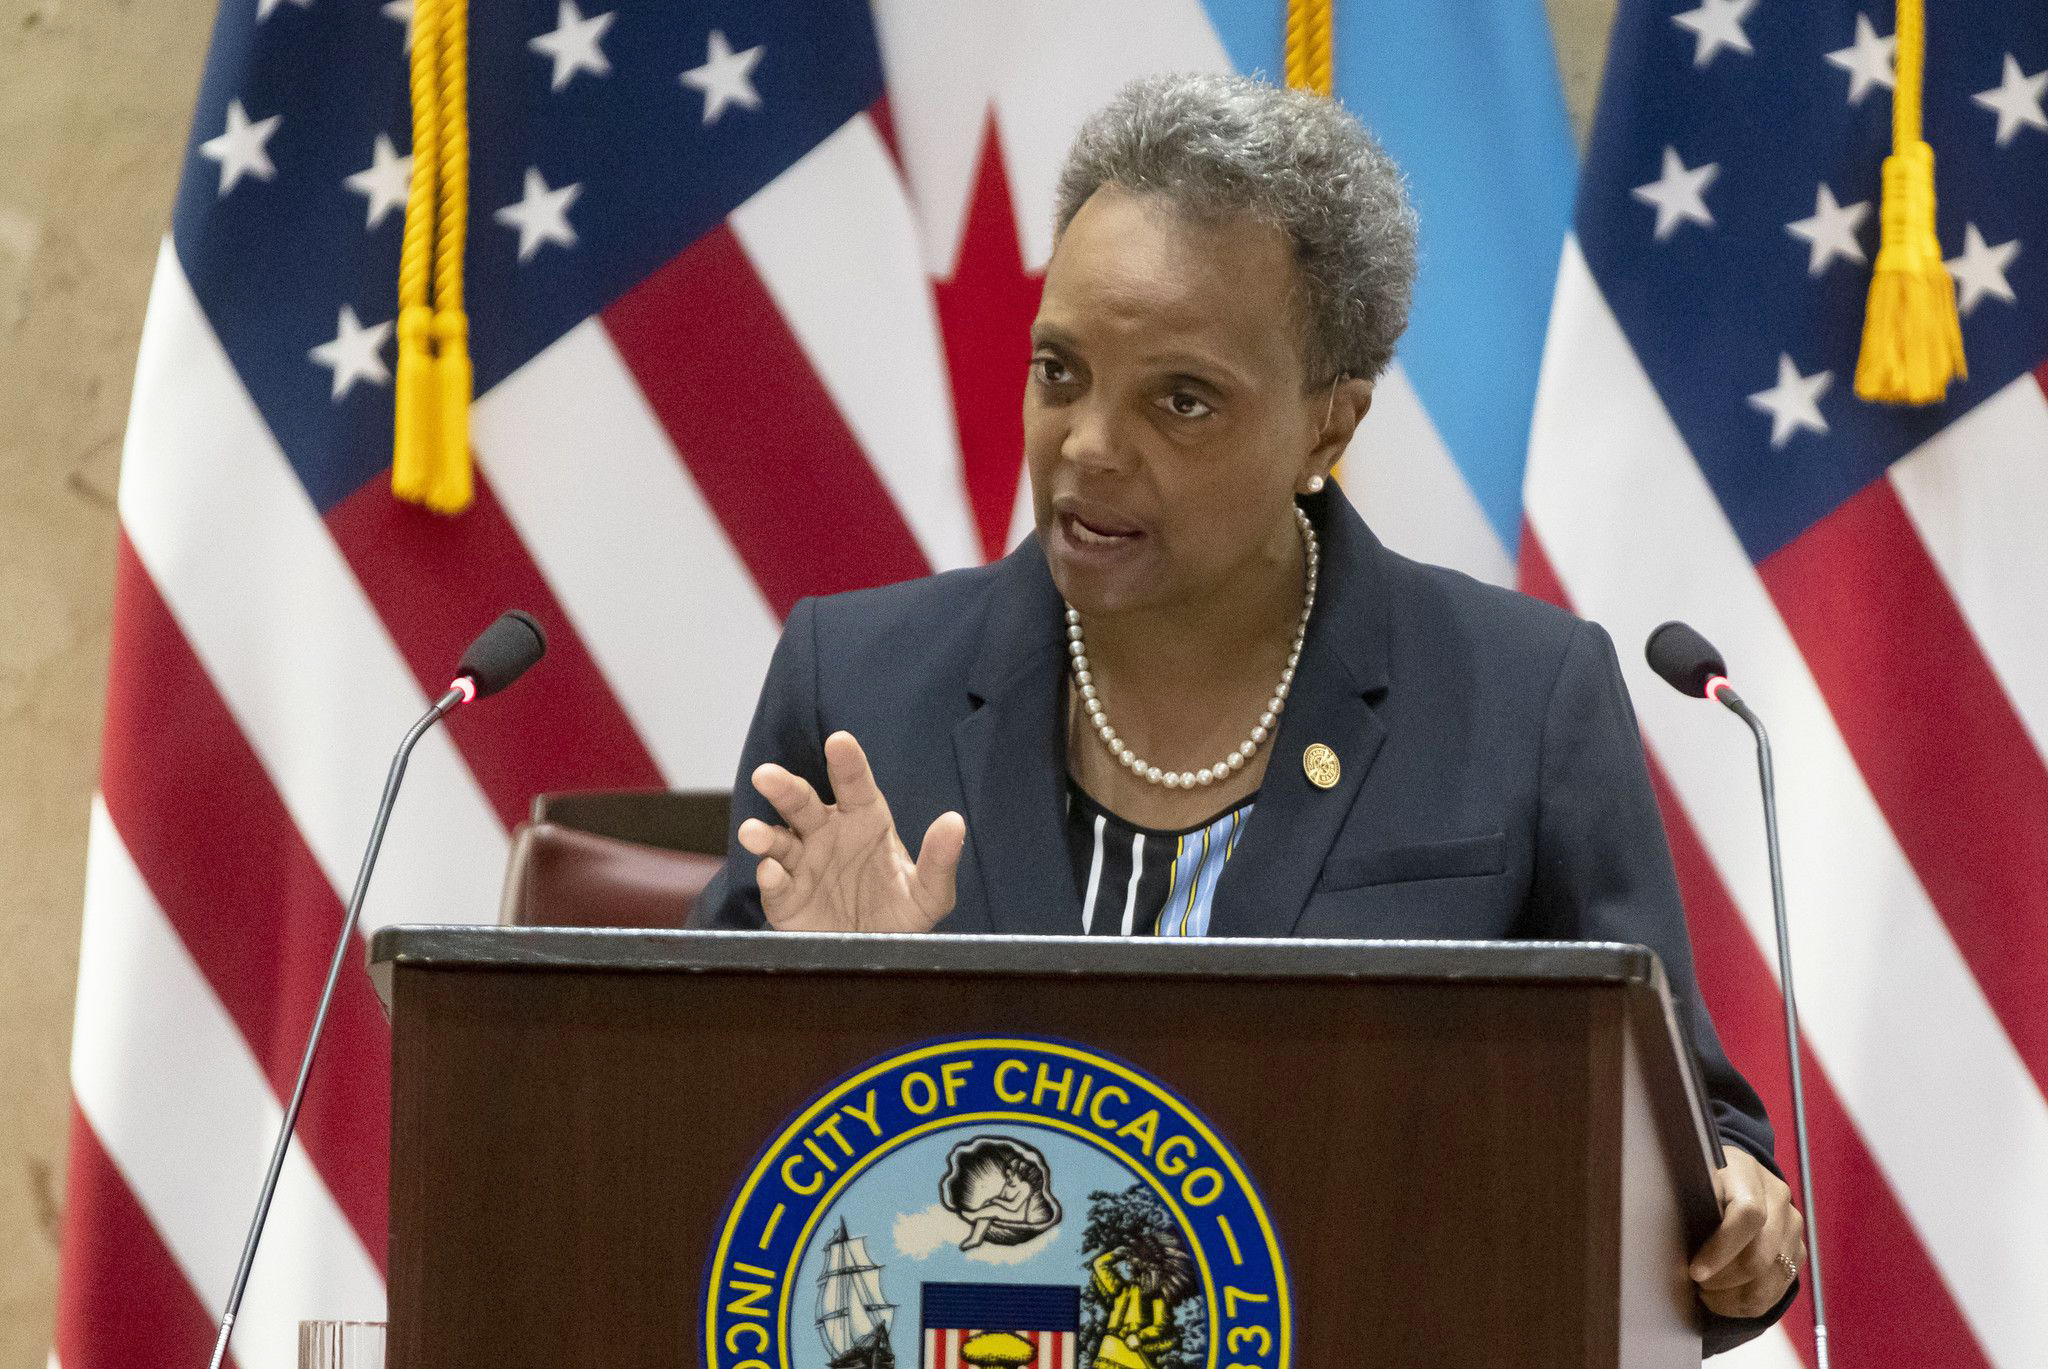 PHOTO: In this Oct. 21, 2020, file photo, Mayor Lori Lightfoot speaks at City Hall in Chicago.